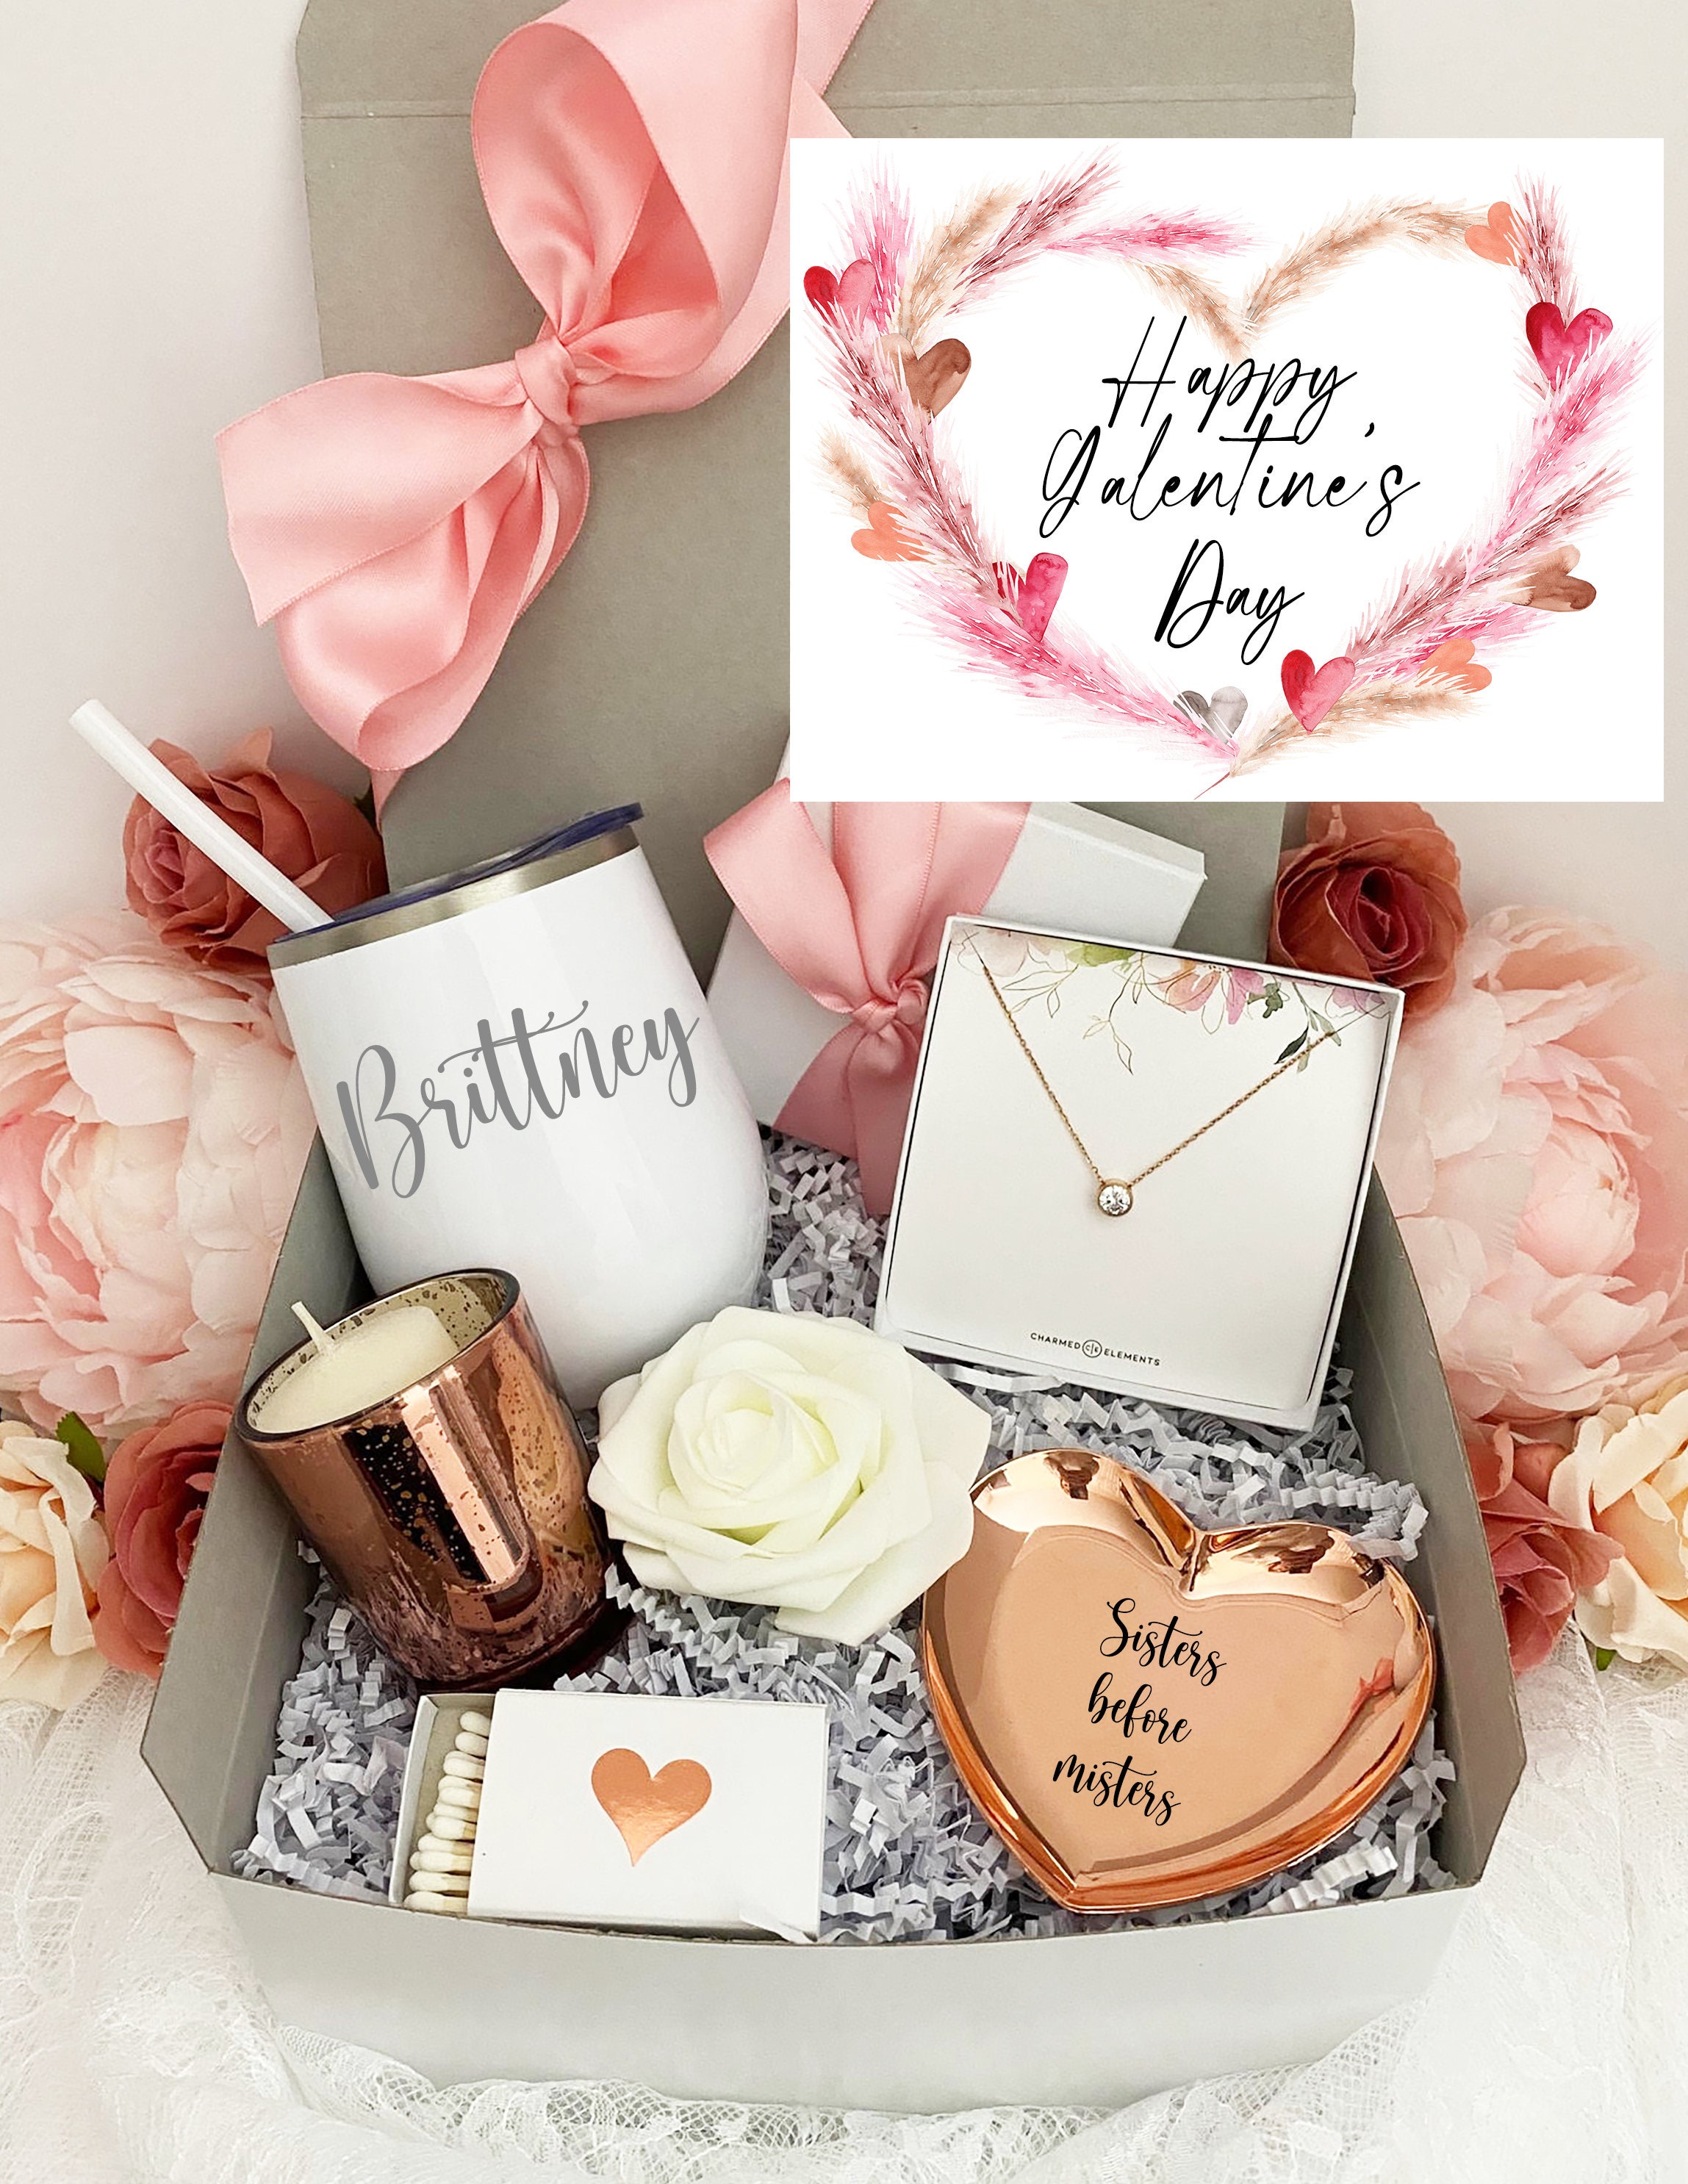 Friendship Gift Box or a Unique Birthday Gift or Galentine's Day Gift! -  TickleMe Plant Company, Inc